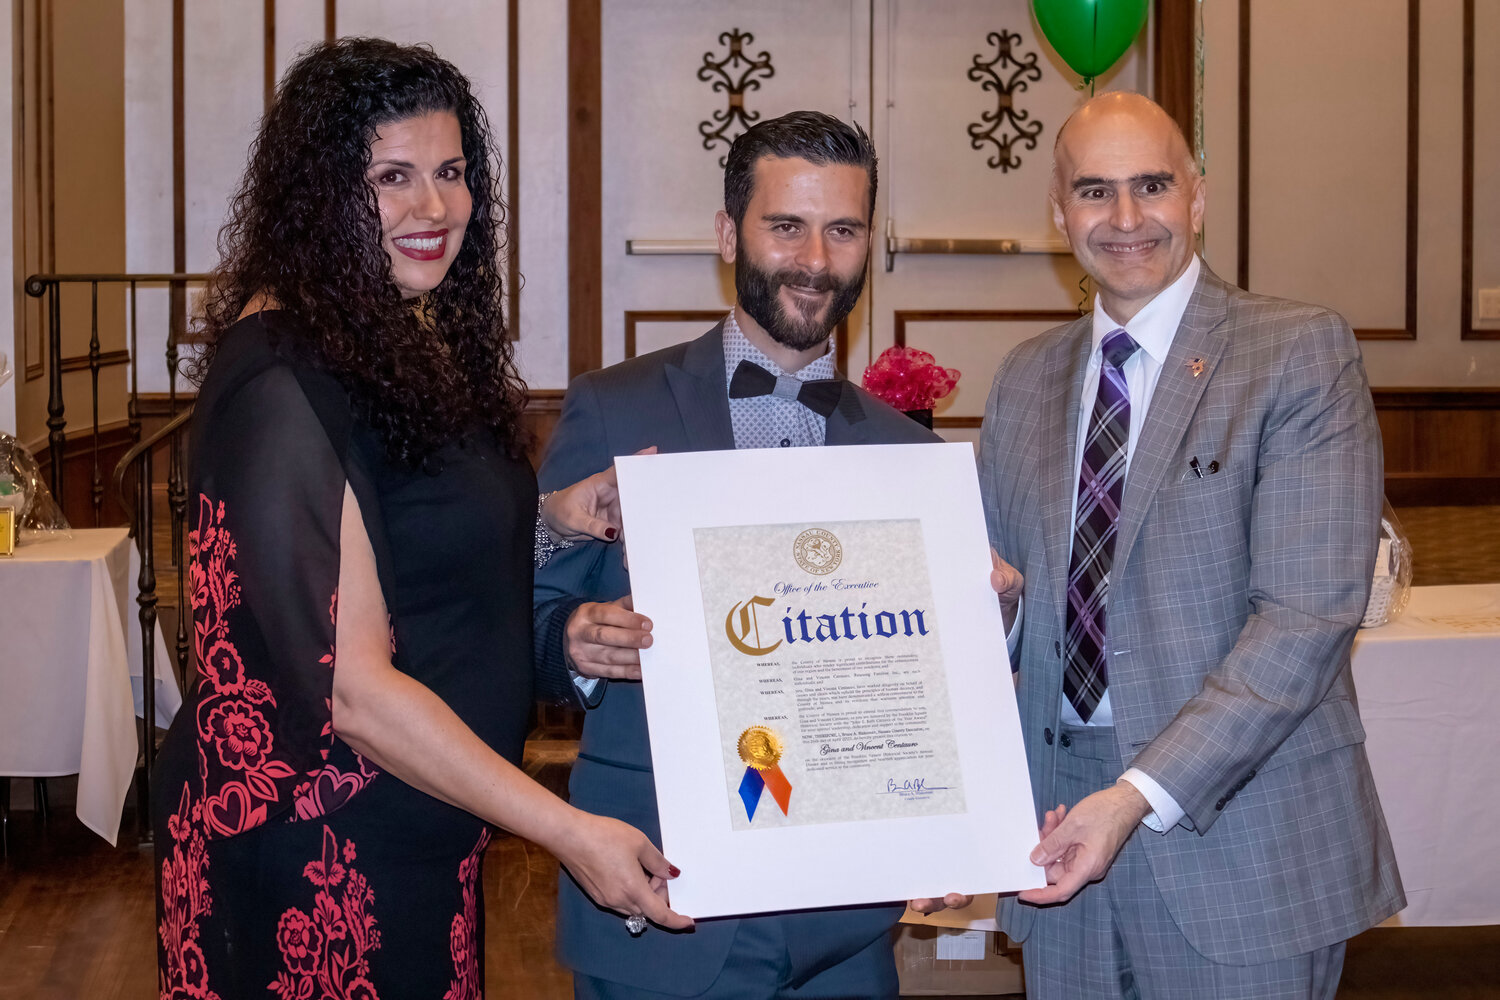 Gina, left, and Vincent Centauro of Rescuing Families, Inc received the 2023 Citizens of the Year award from Nassau County Legislator John Giuffre.